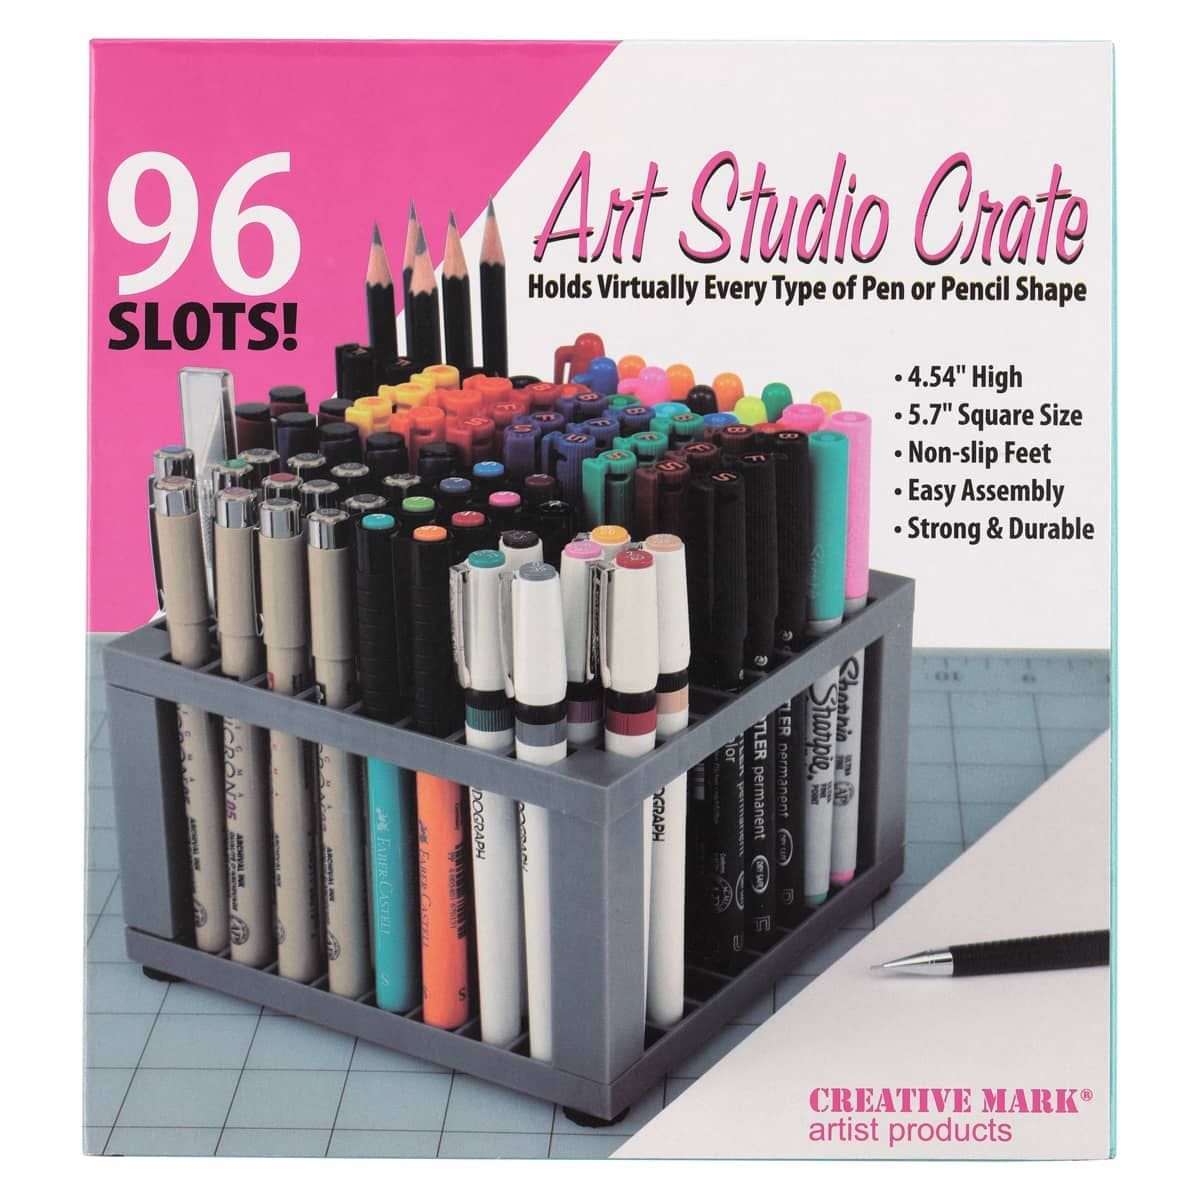 Holds and organizes markers, pens, pencils, brushes, x-acto knives, and more!
